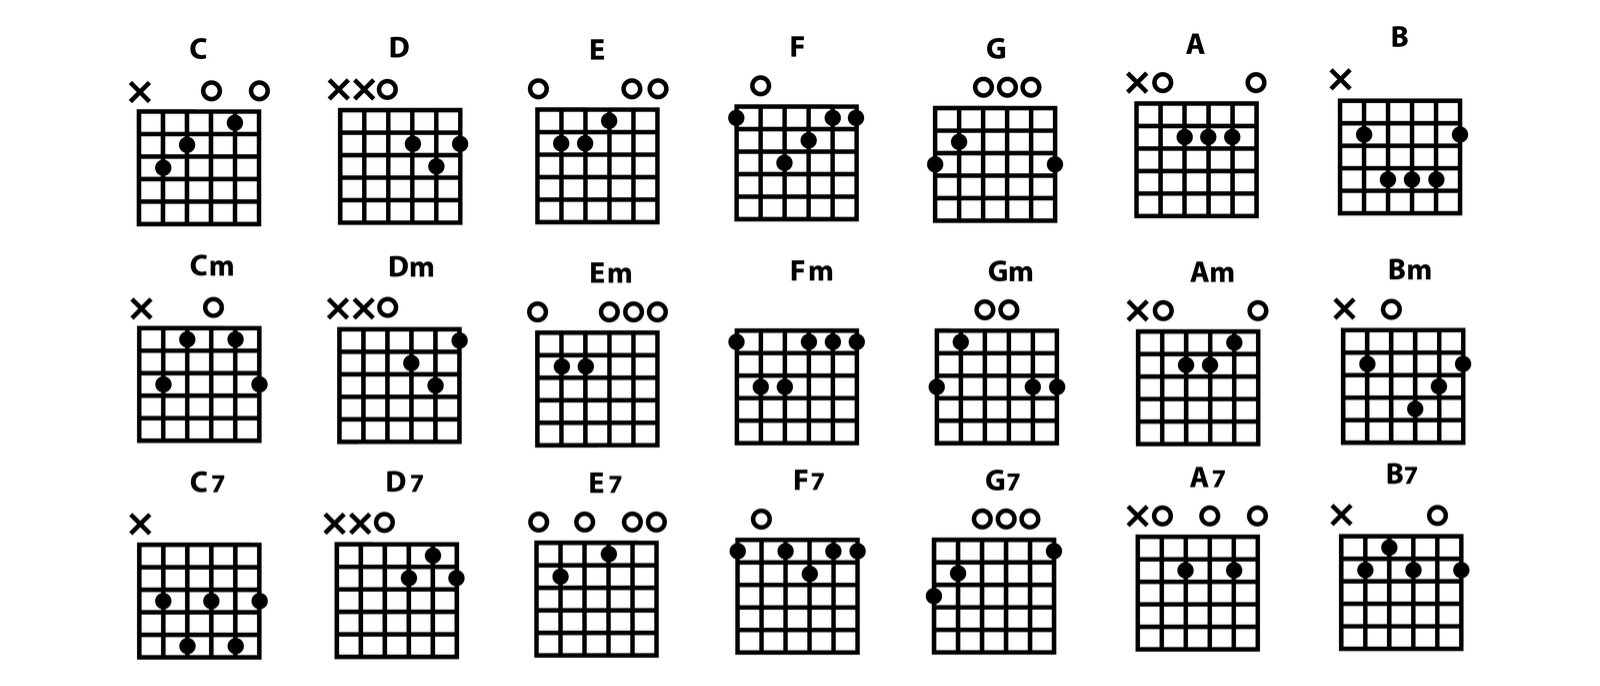 How To Play Guitar Chords How To Play Guitar For Beginners A Step Step Guide